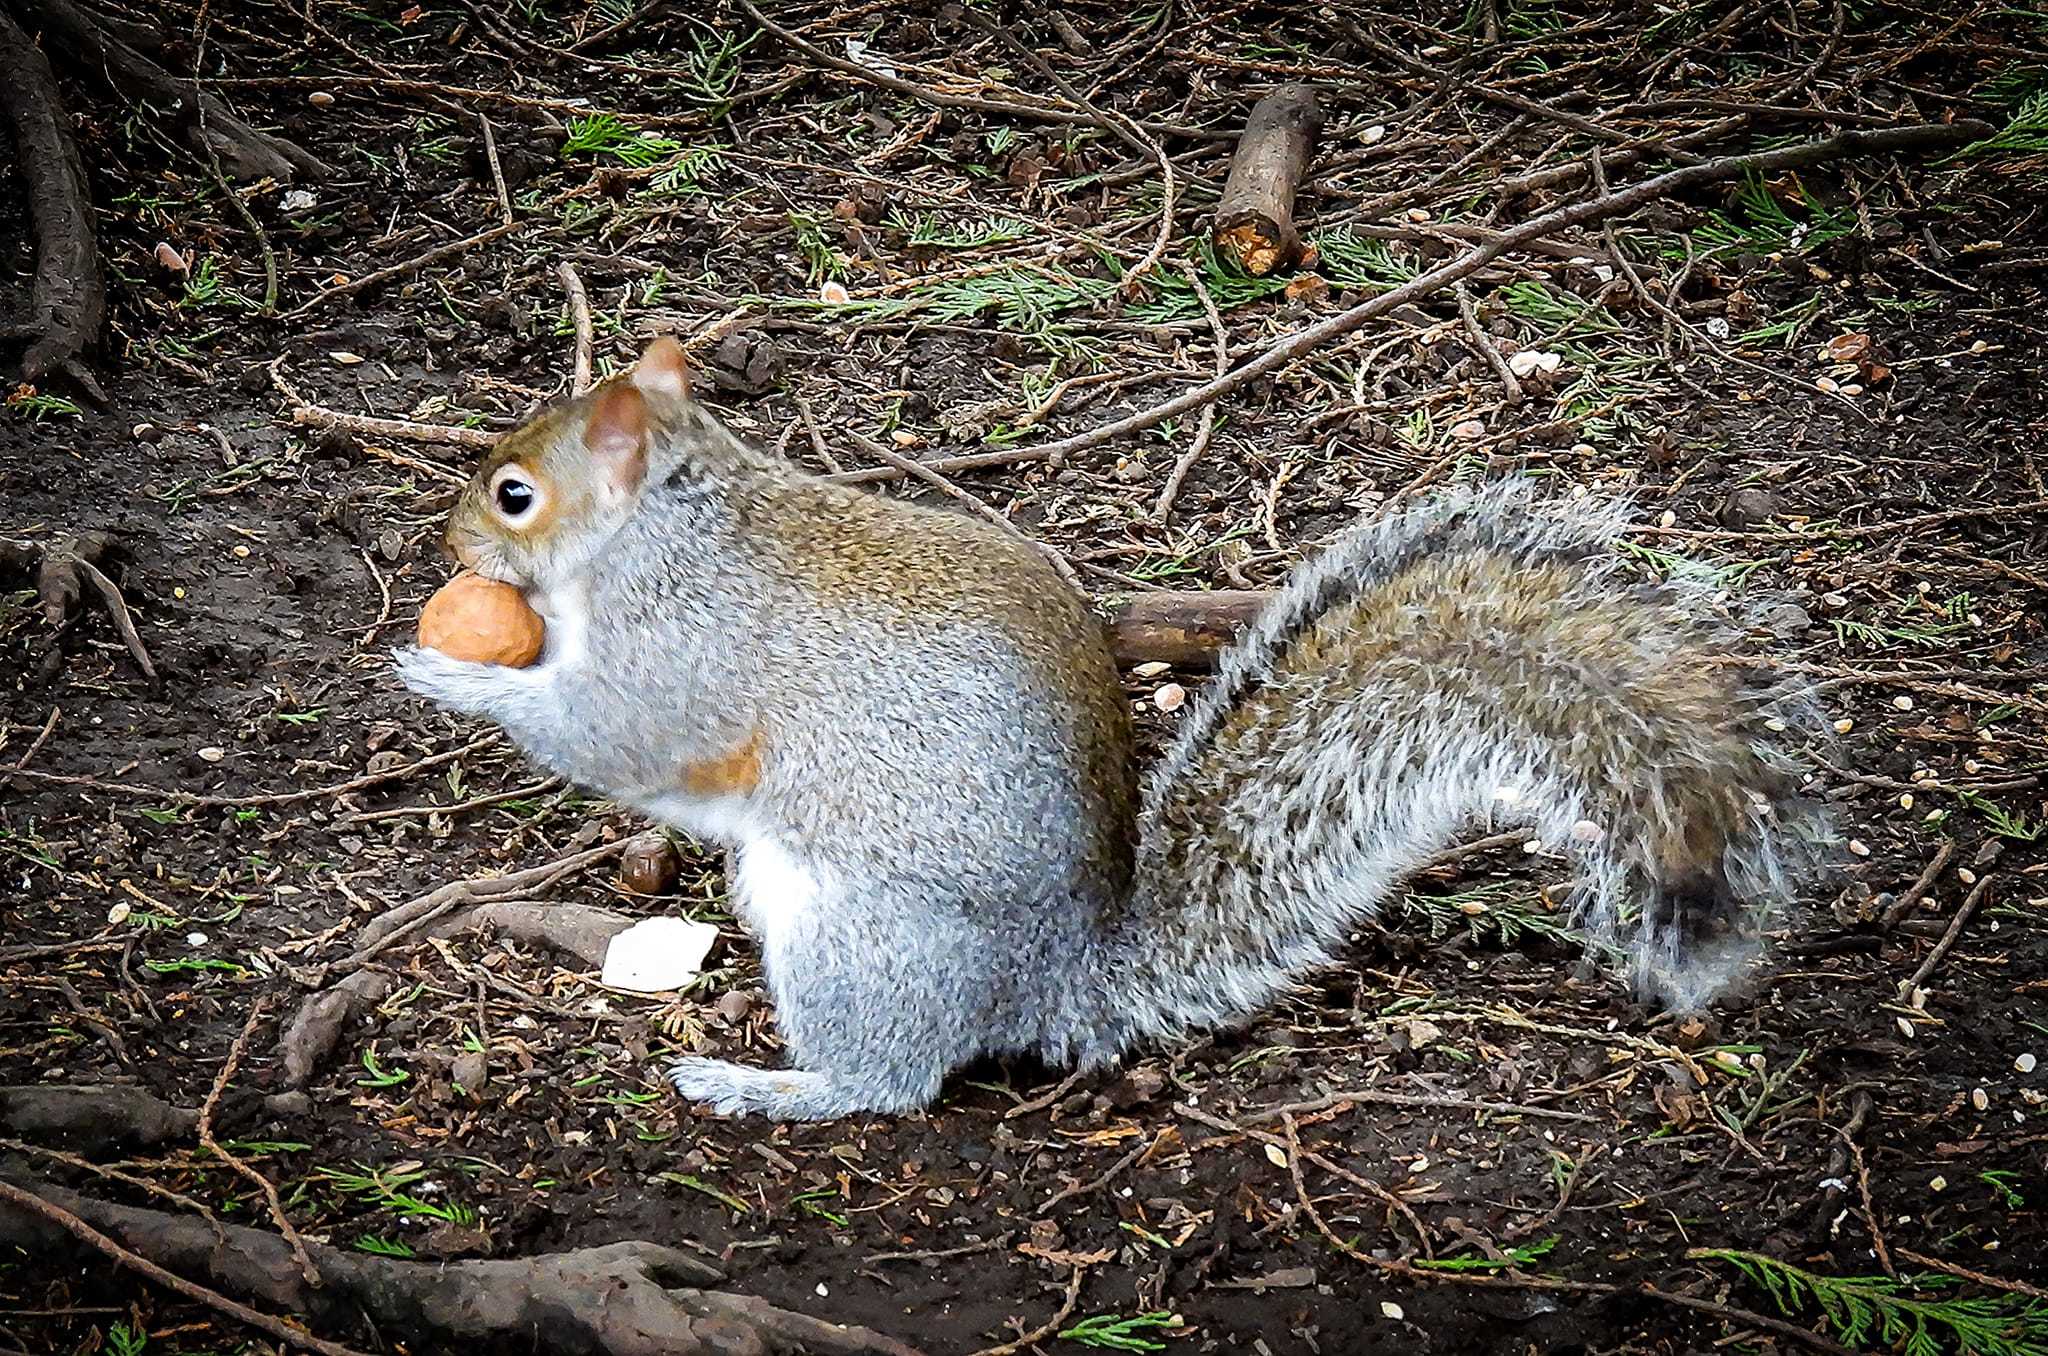 Hands off my nut! by Chris Shaw